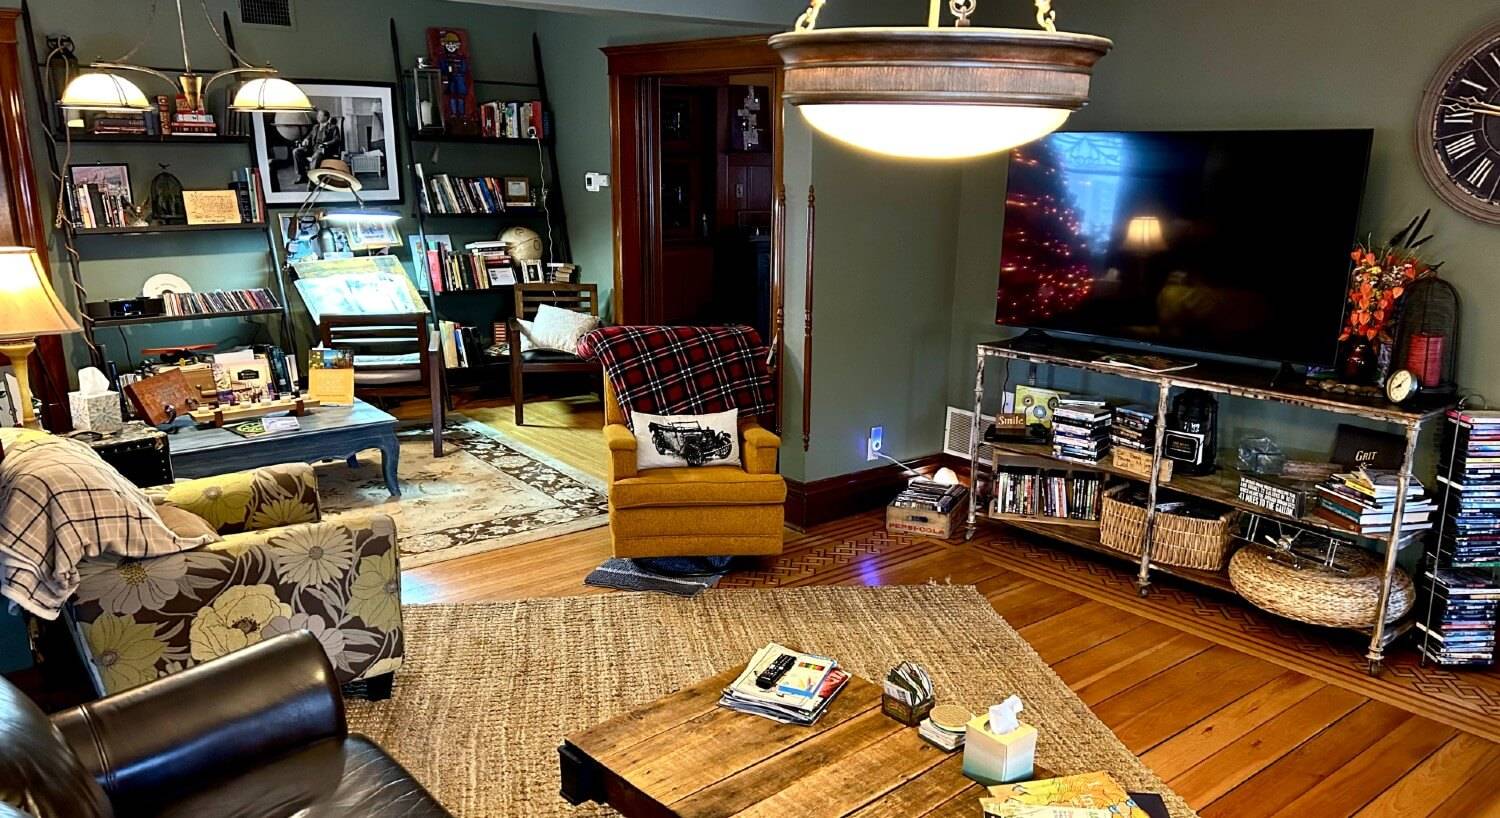 Living room of a home with TV on a console filled with books, coffee table, sitting chairs and large bookshelves